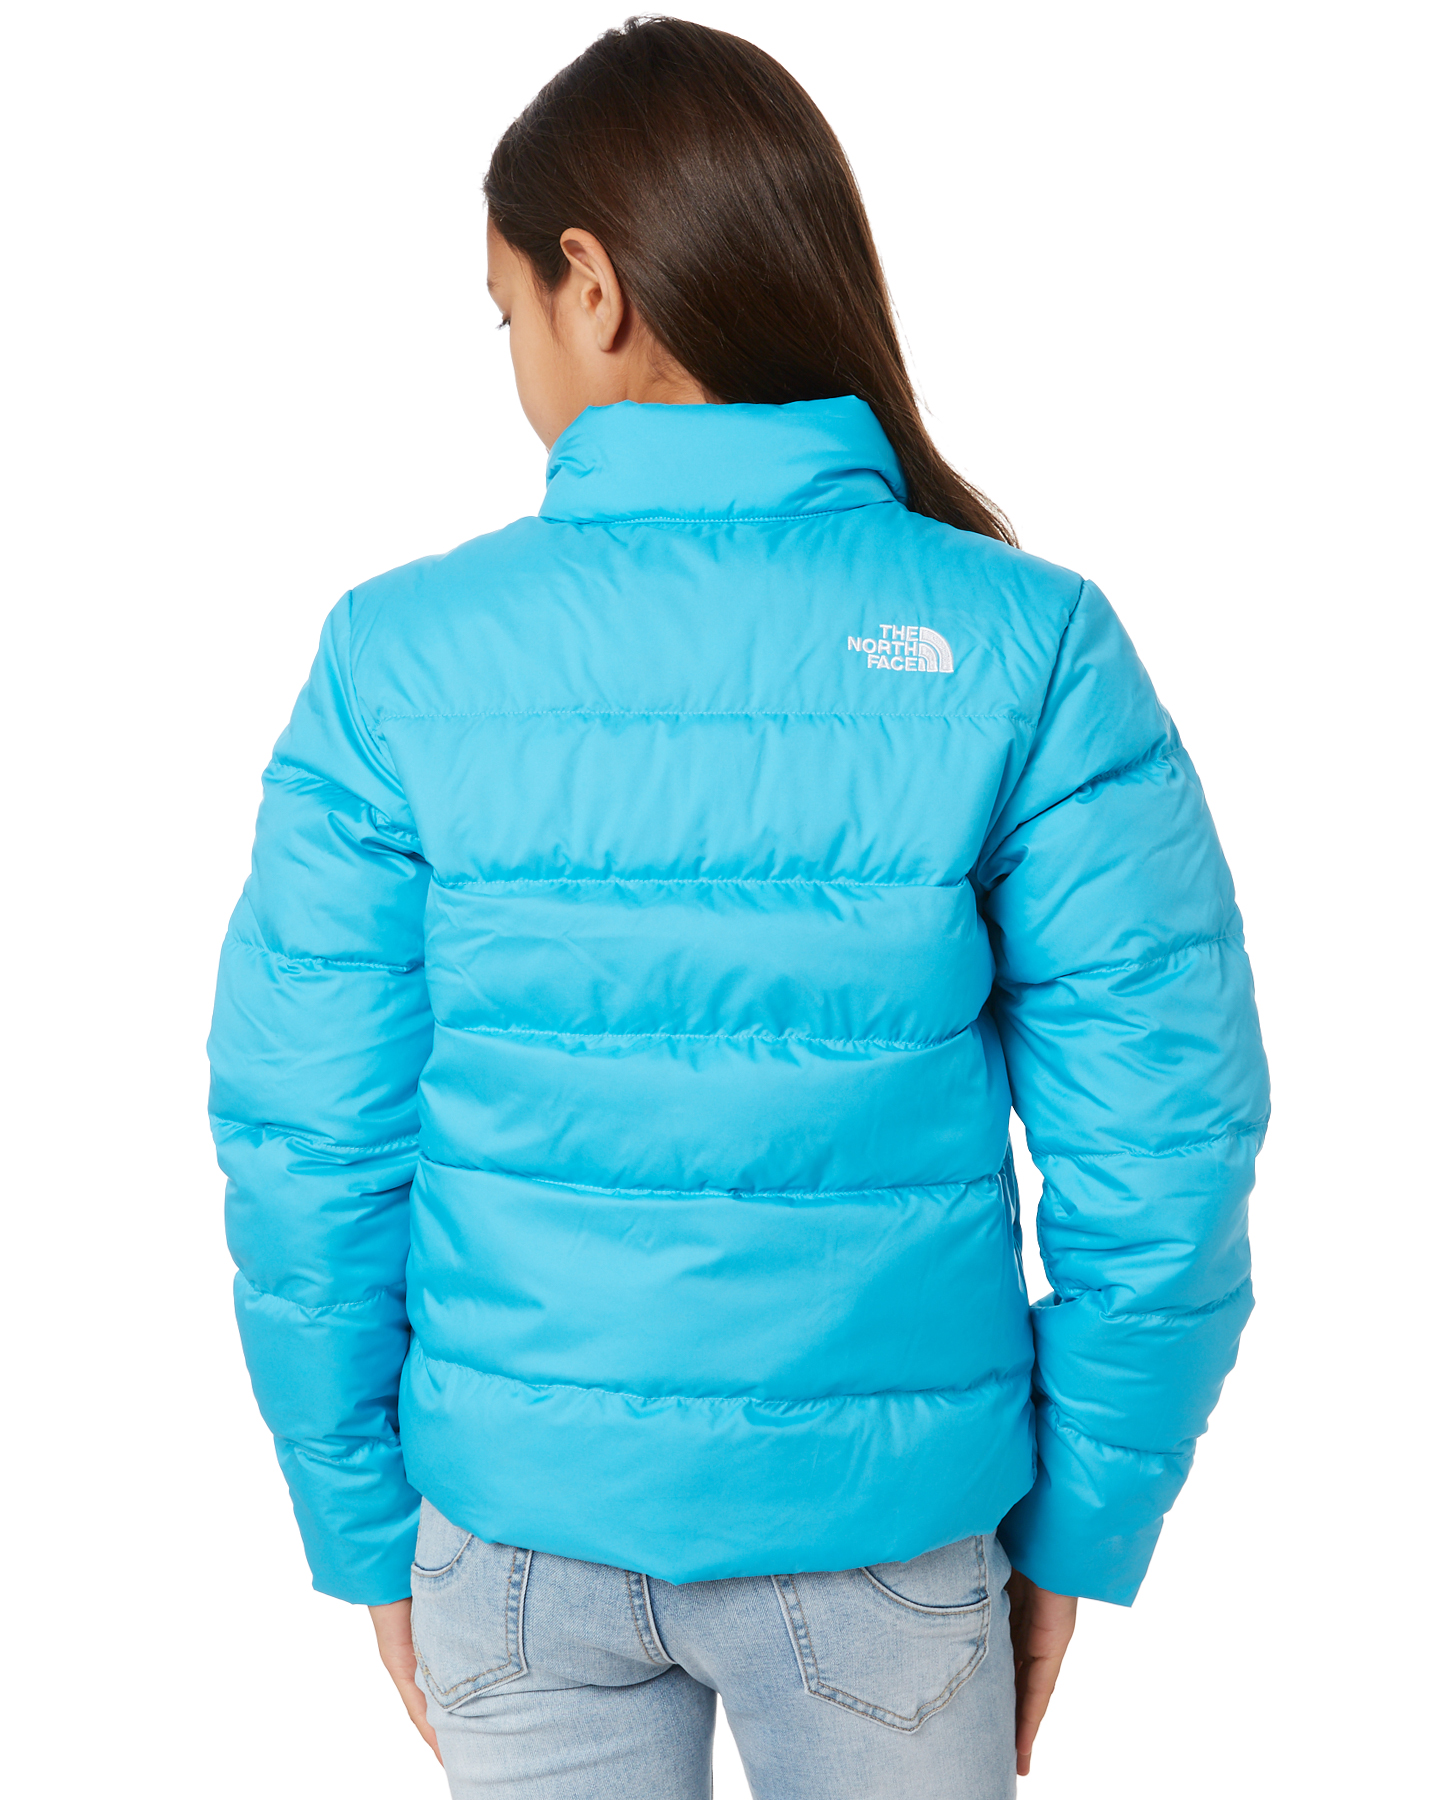 The North Face Youth Girls Andes Down Jacket - Turquoise Blue | SurfStitch